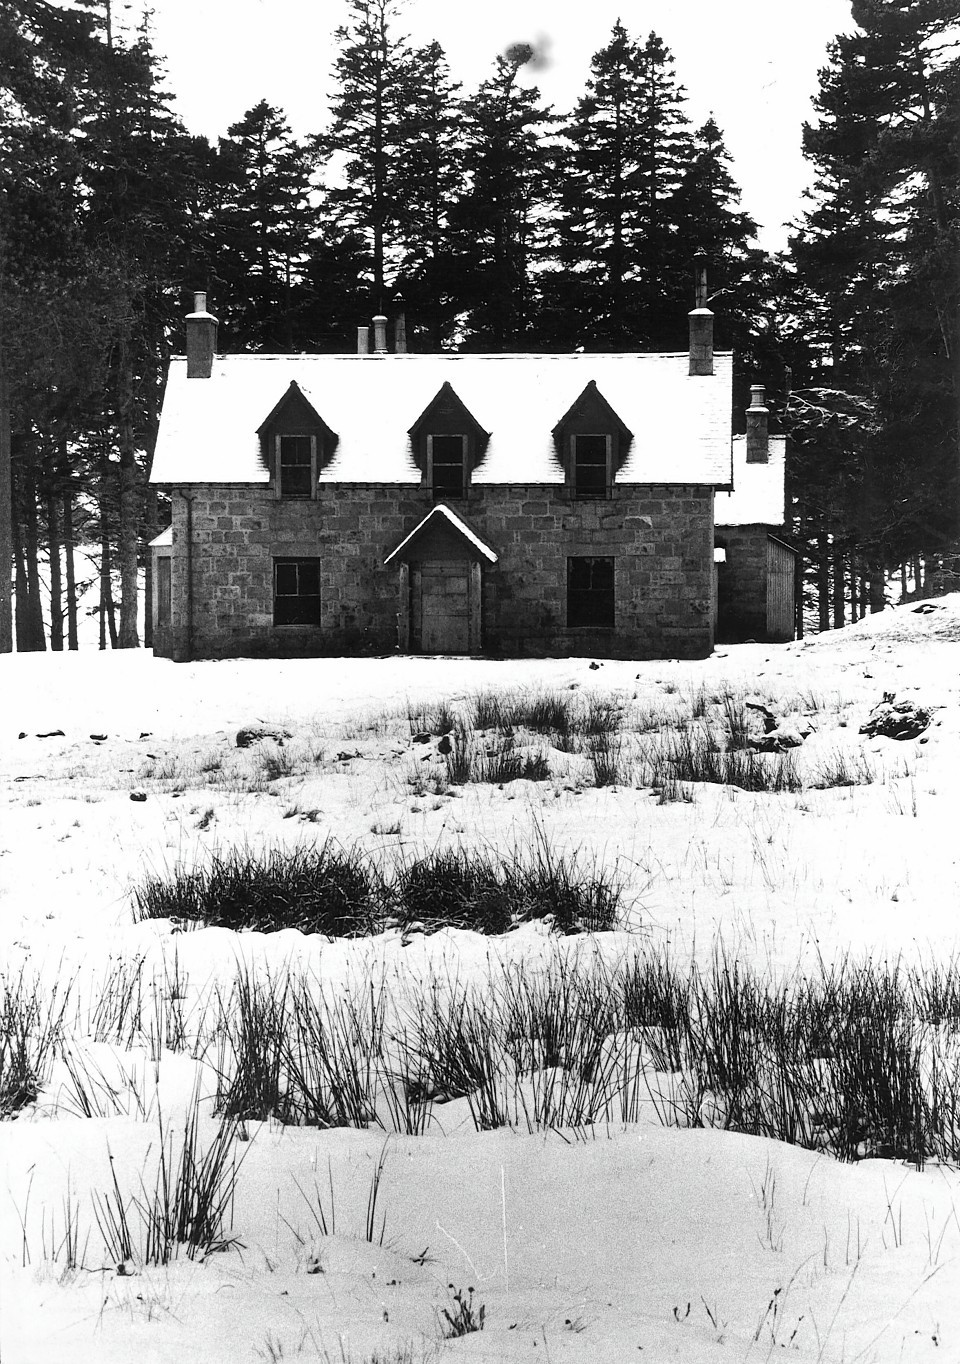 Derry Lodge, in the Aberdeenshire end of the Cairngorms